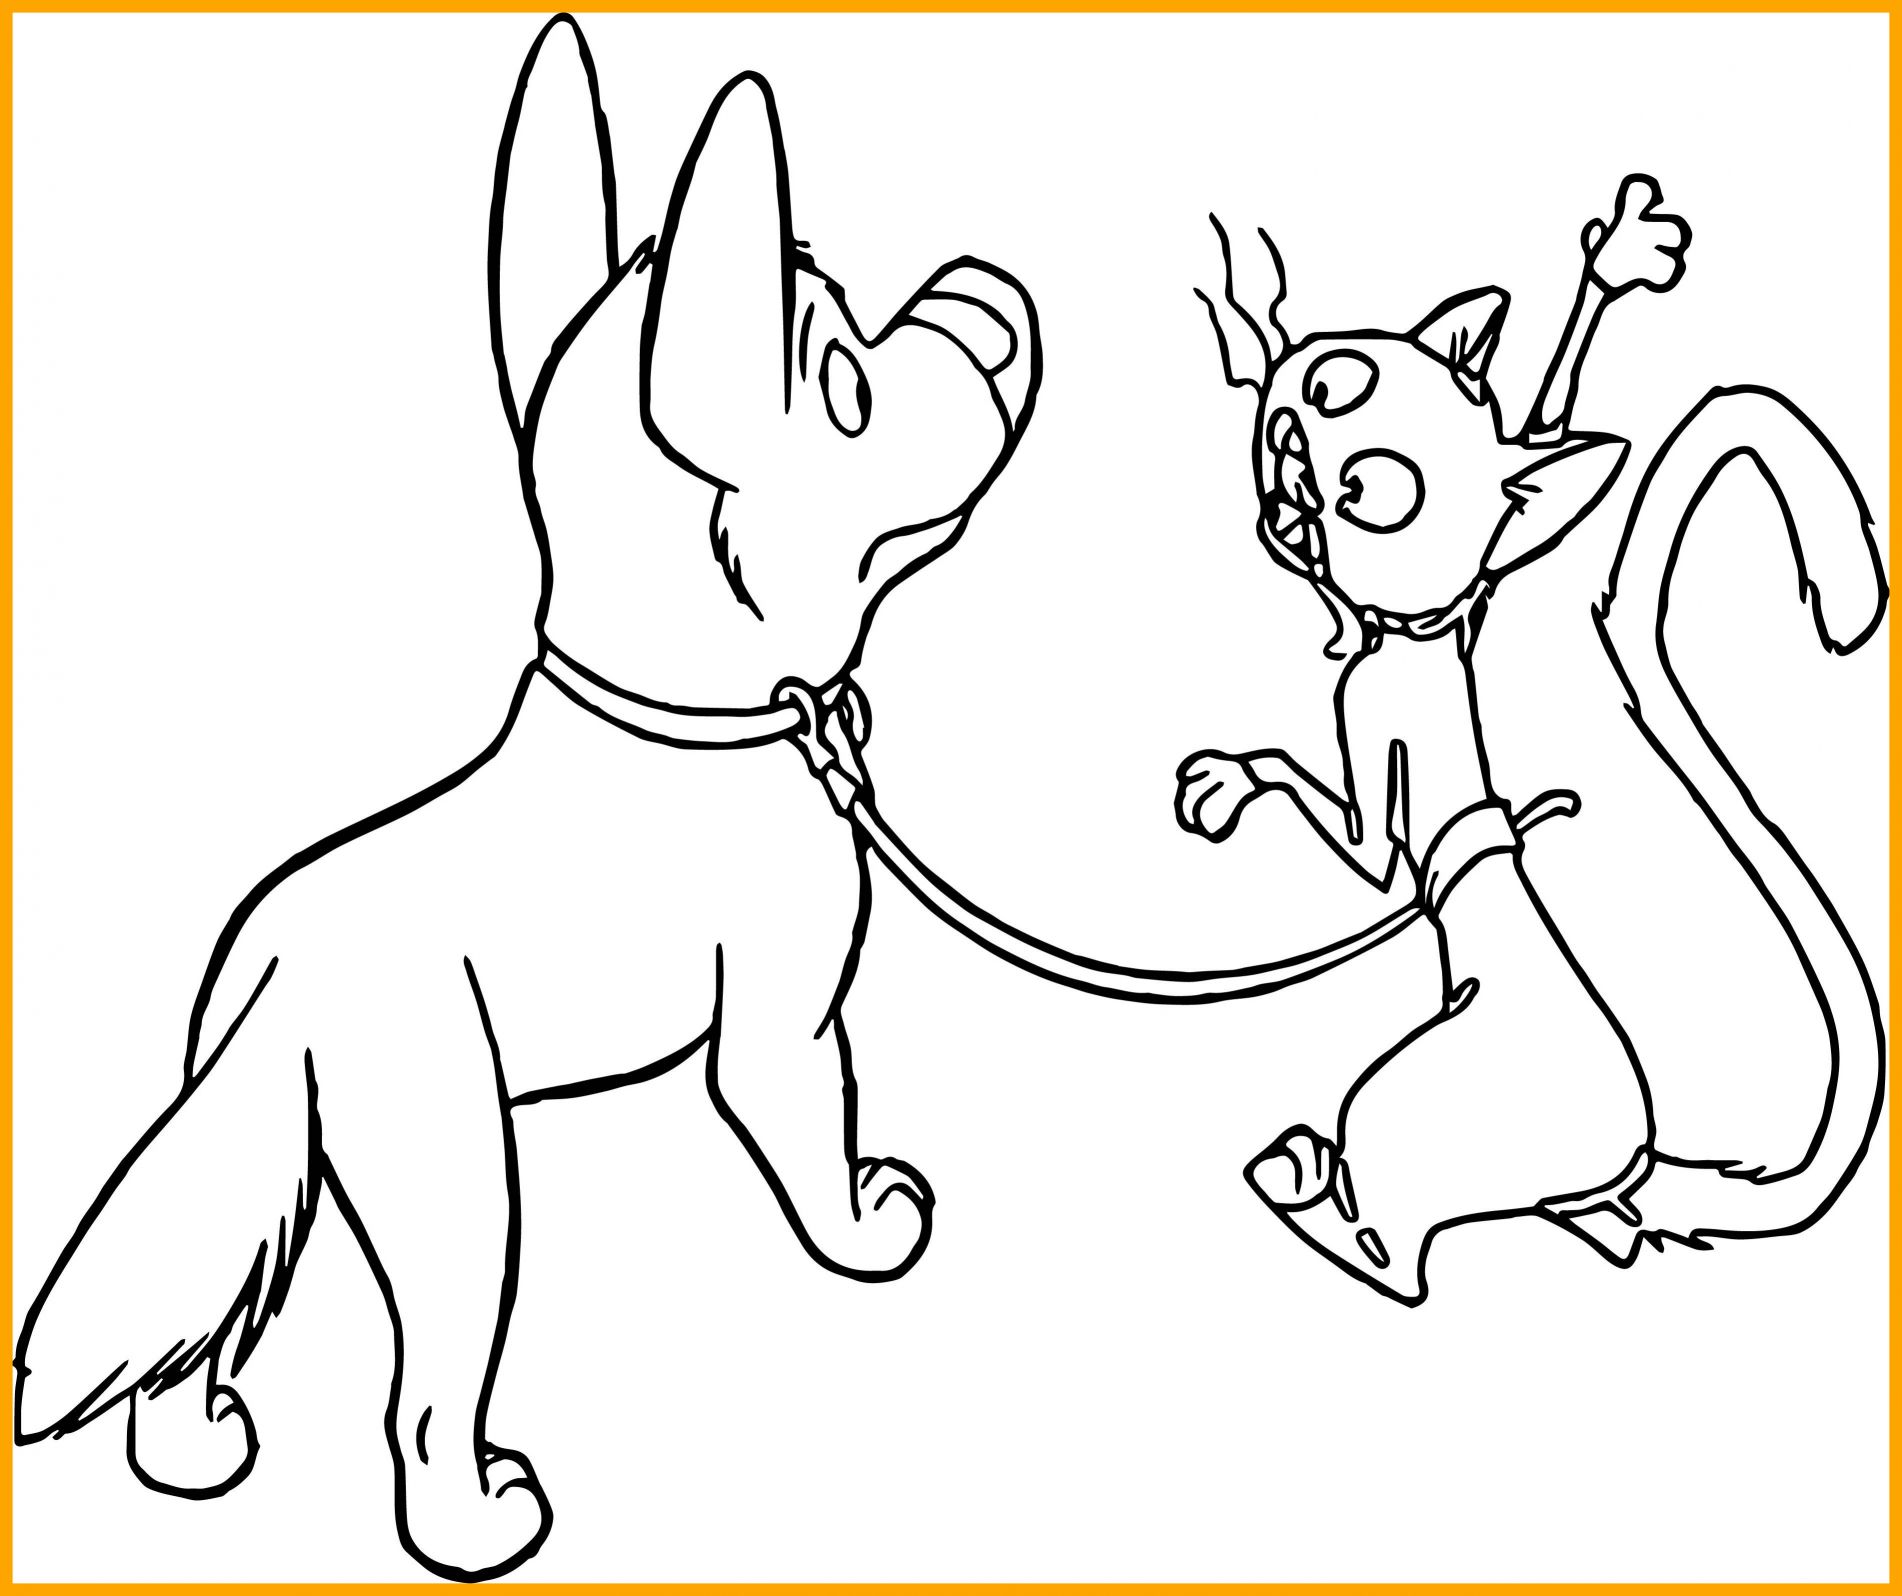 Dog And Cat Coloring Pages Printable at